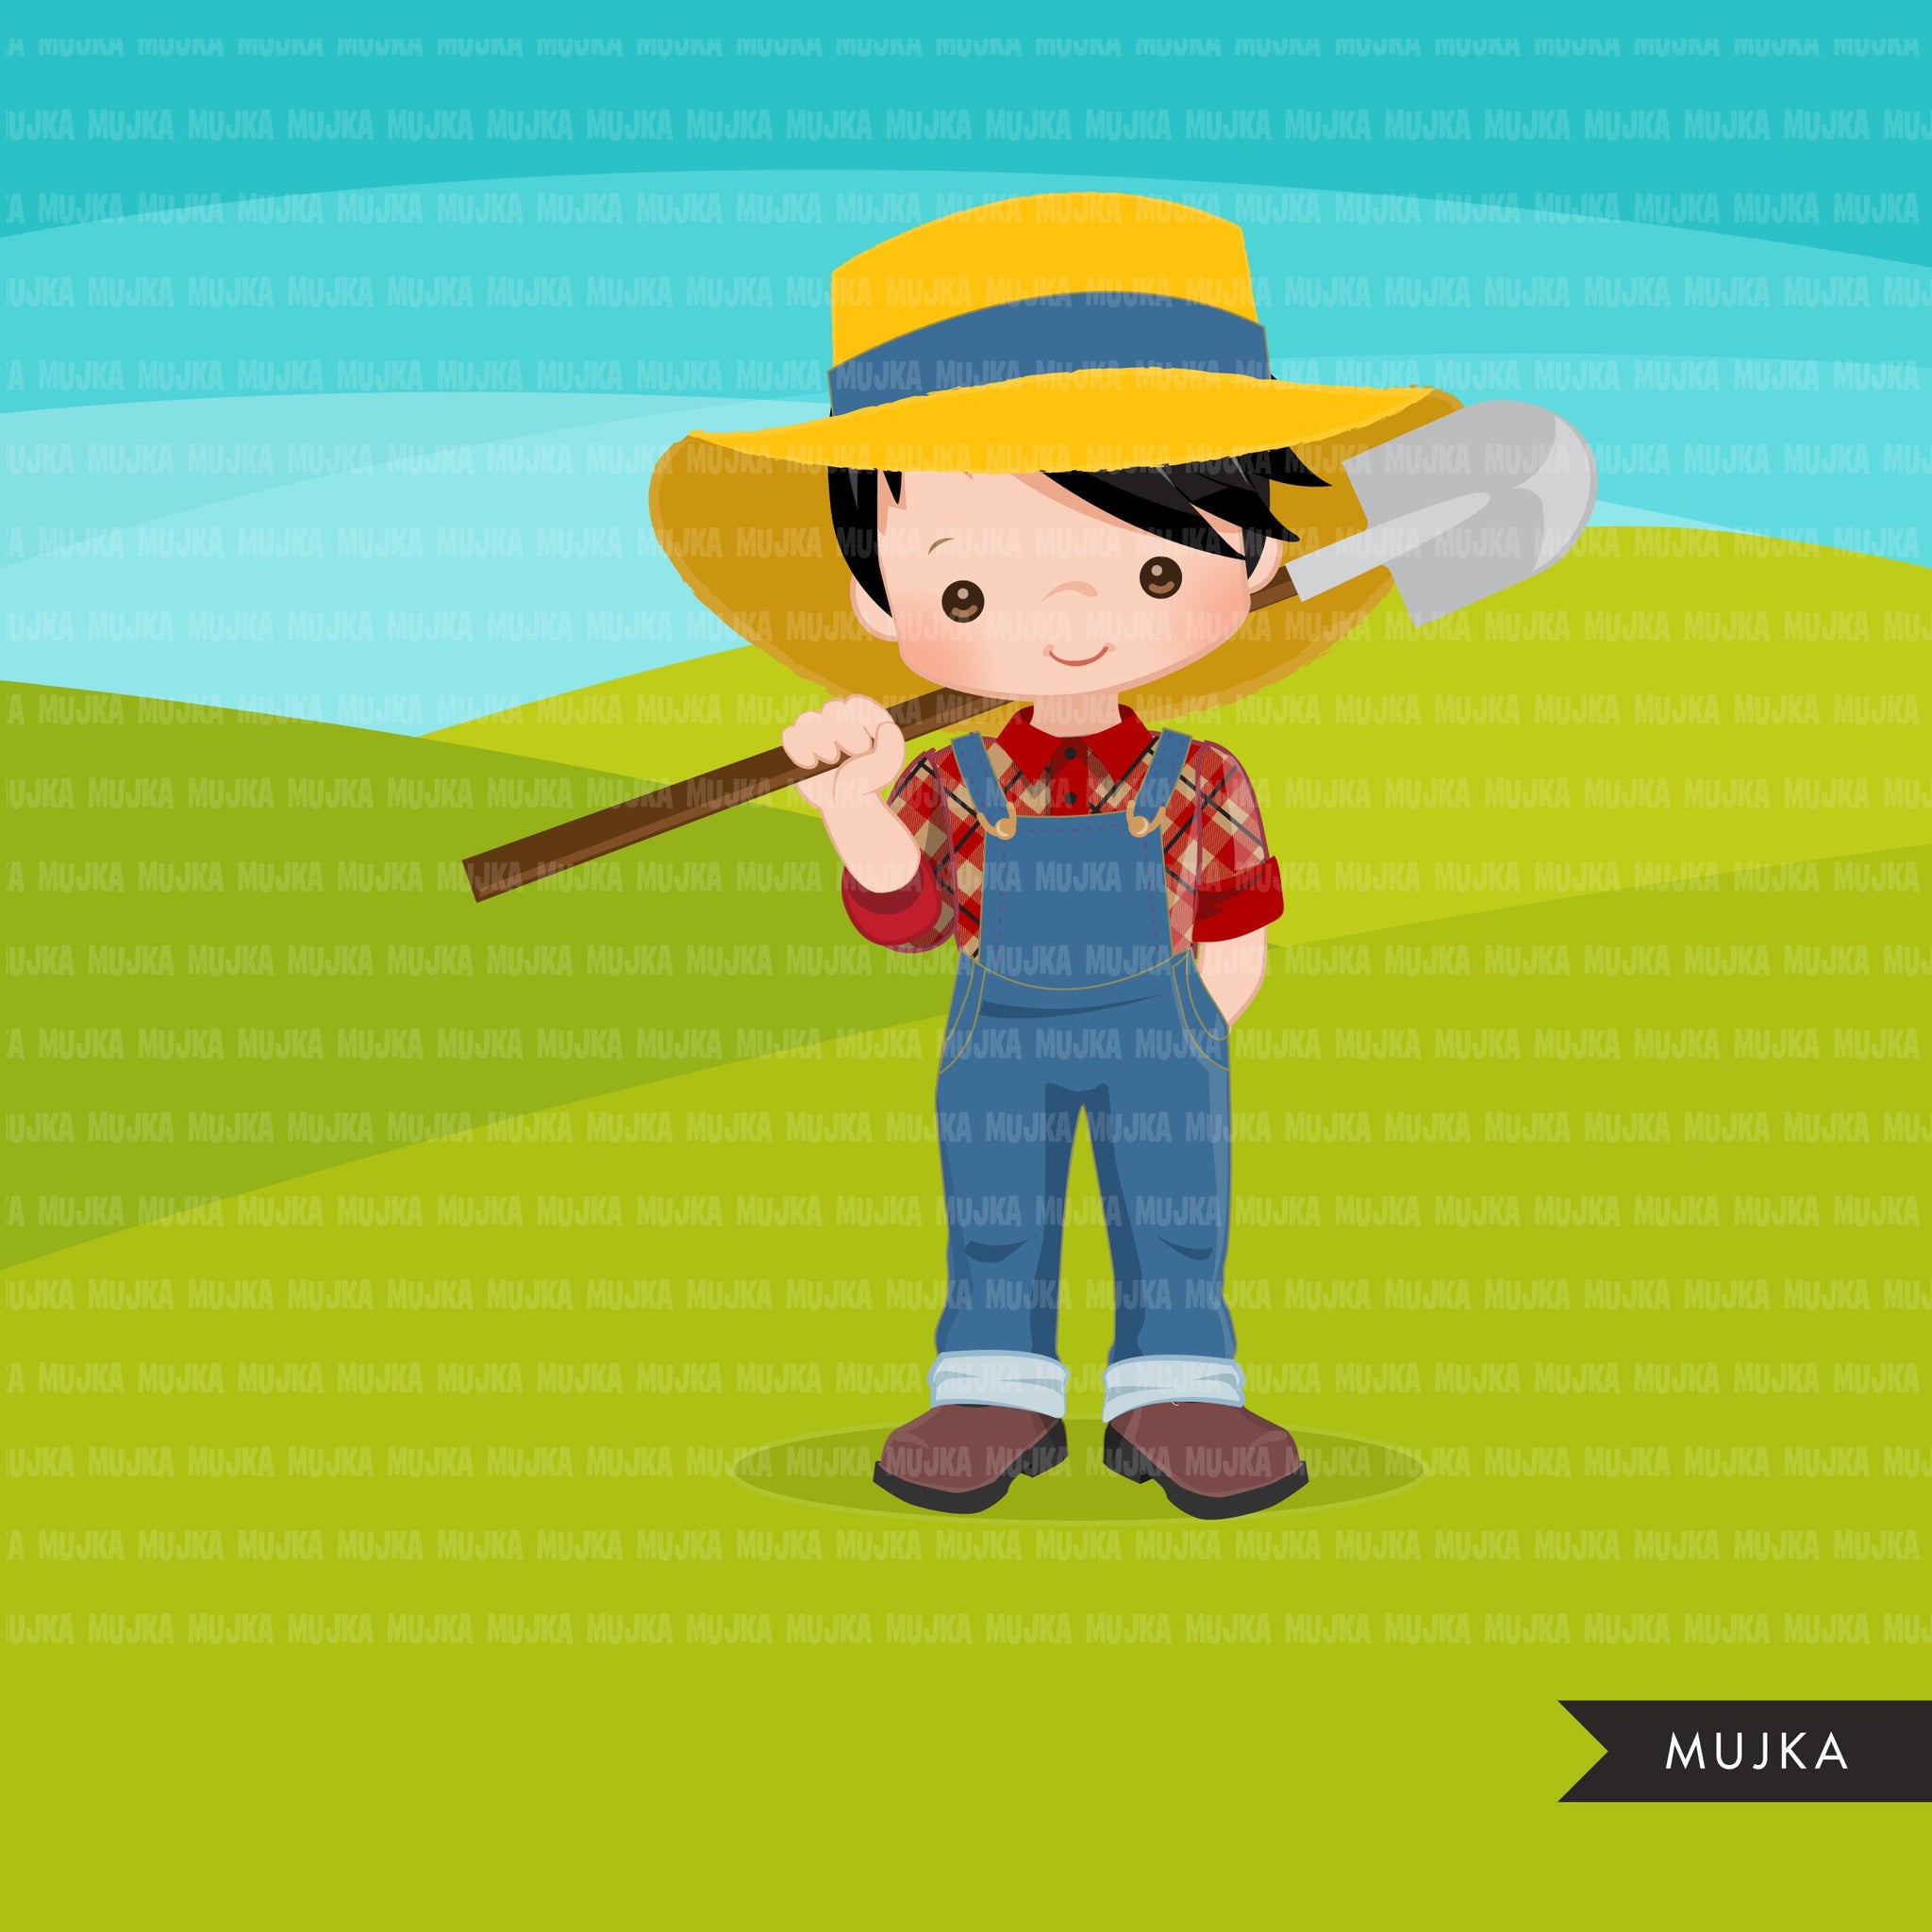 Farmer Boys clipart, farmer characters with shovel, farmer hat, country graphics, country boy with hat